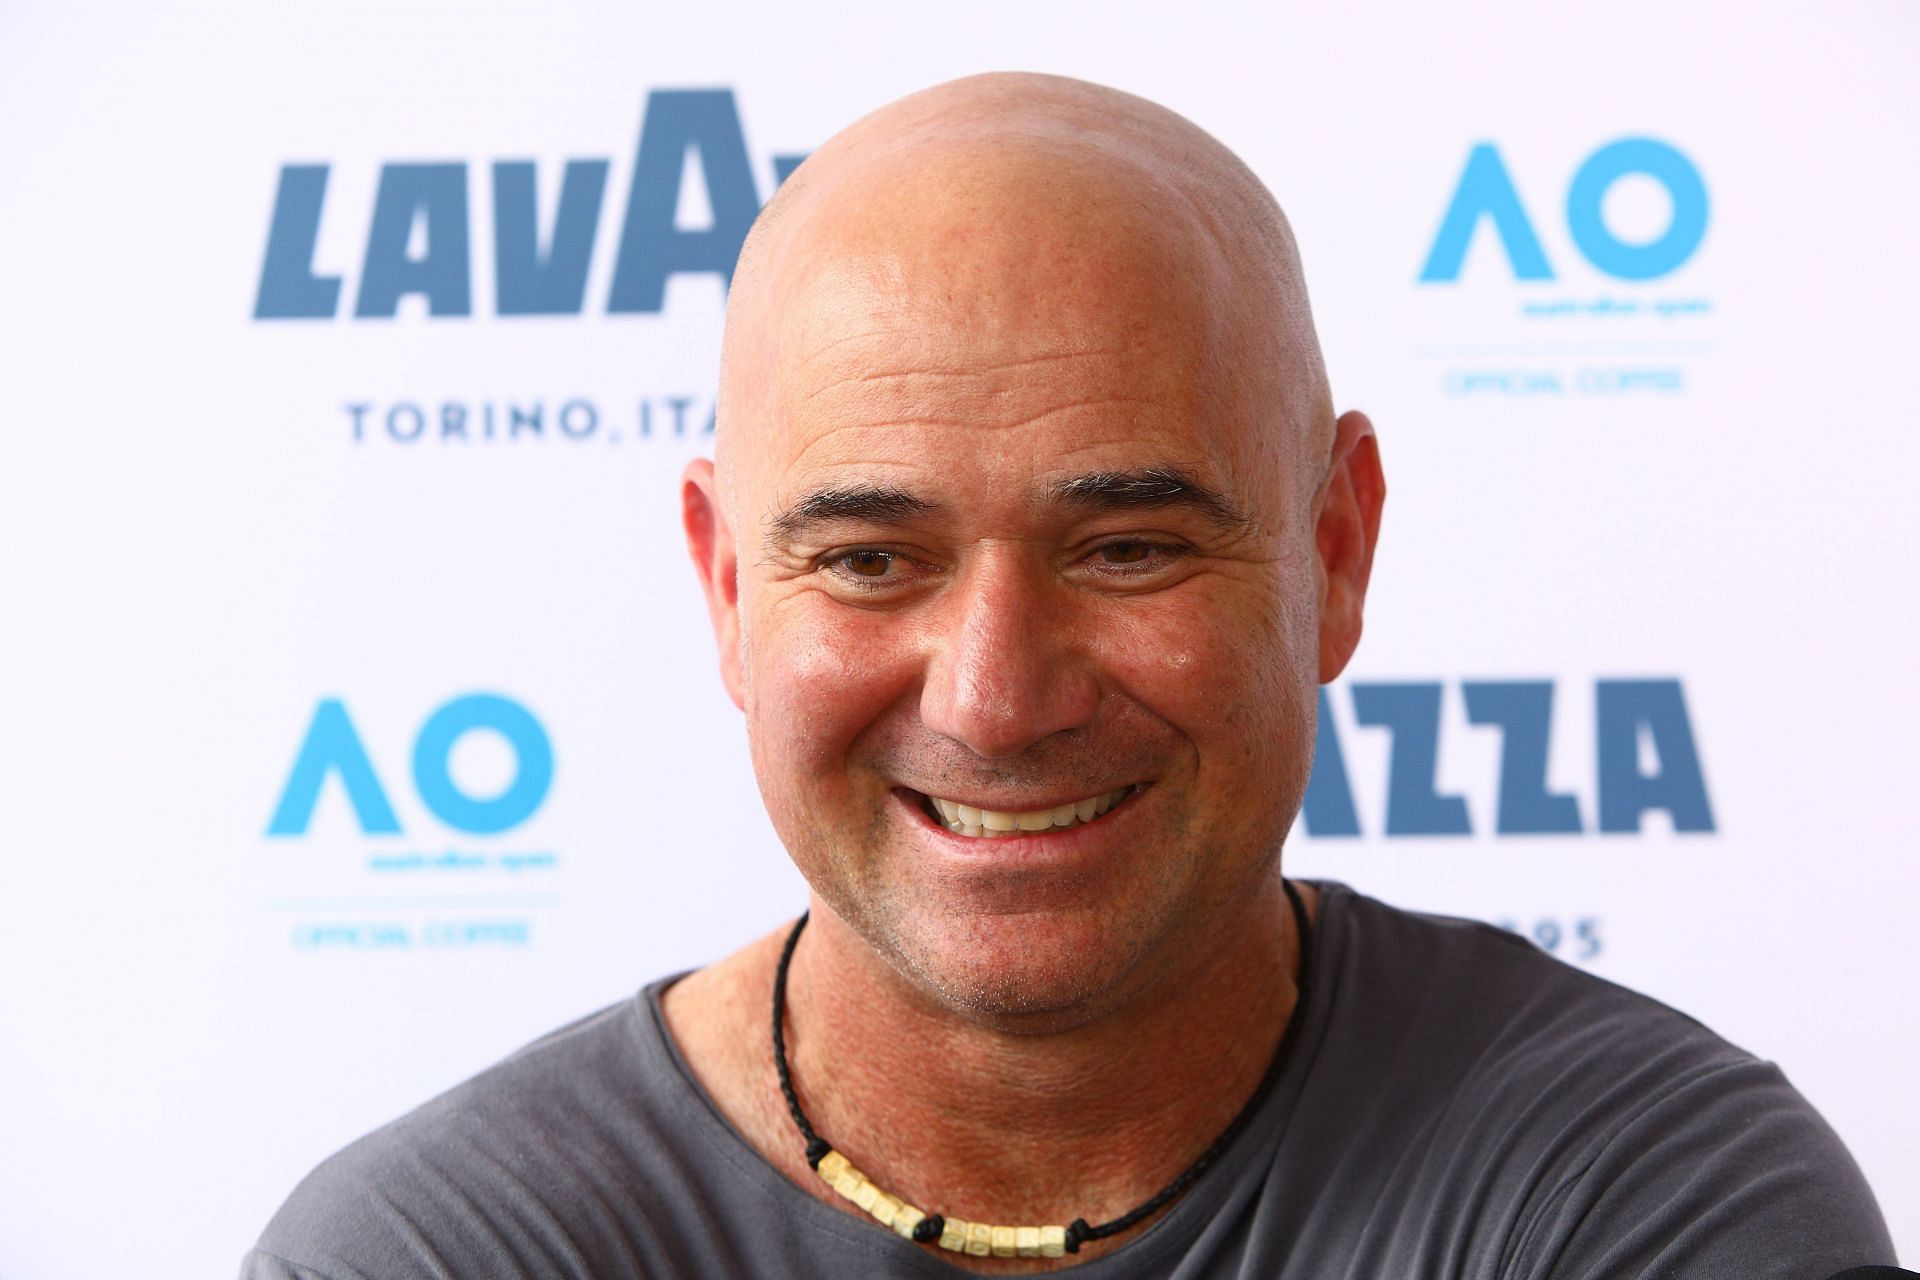 Andre Agassi pictured at The 2019 Australian Open.